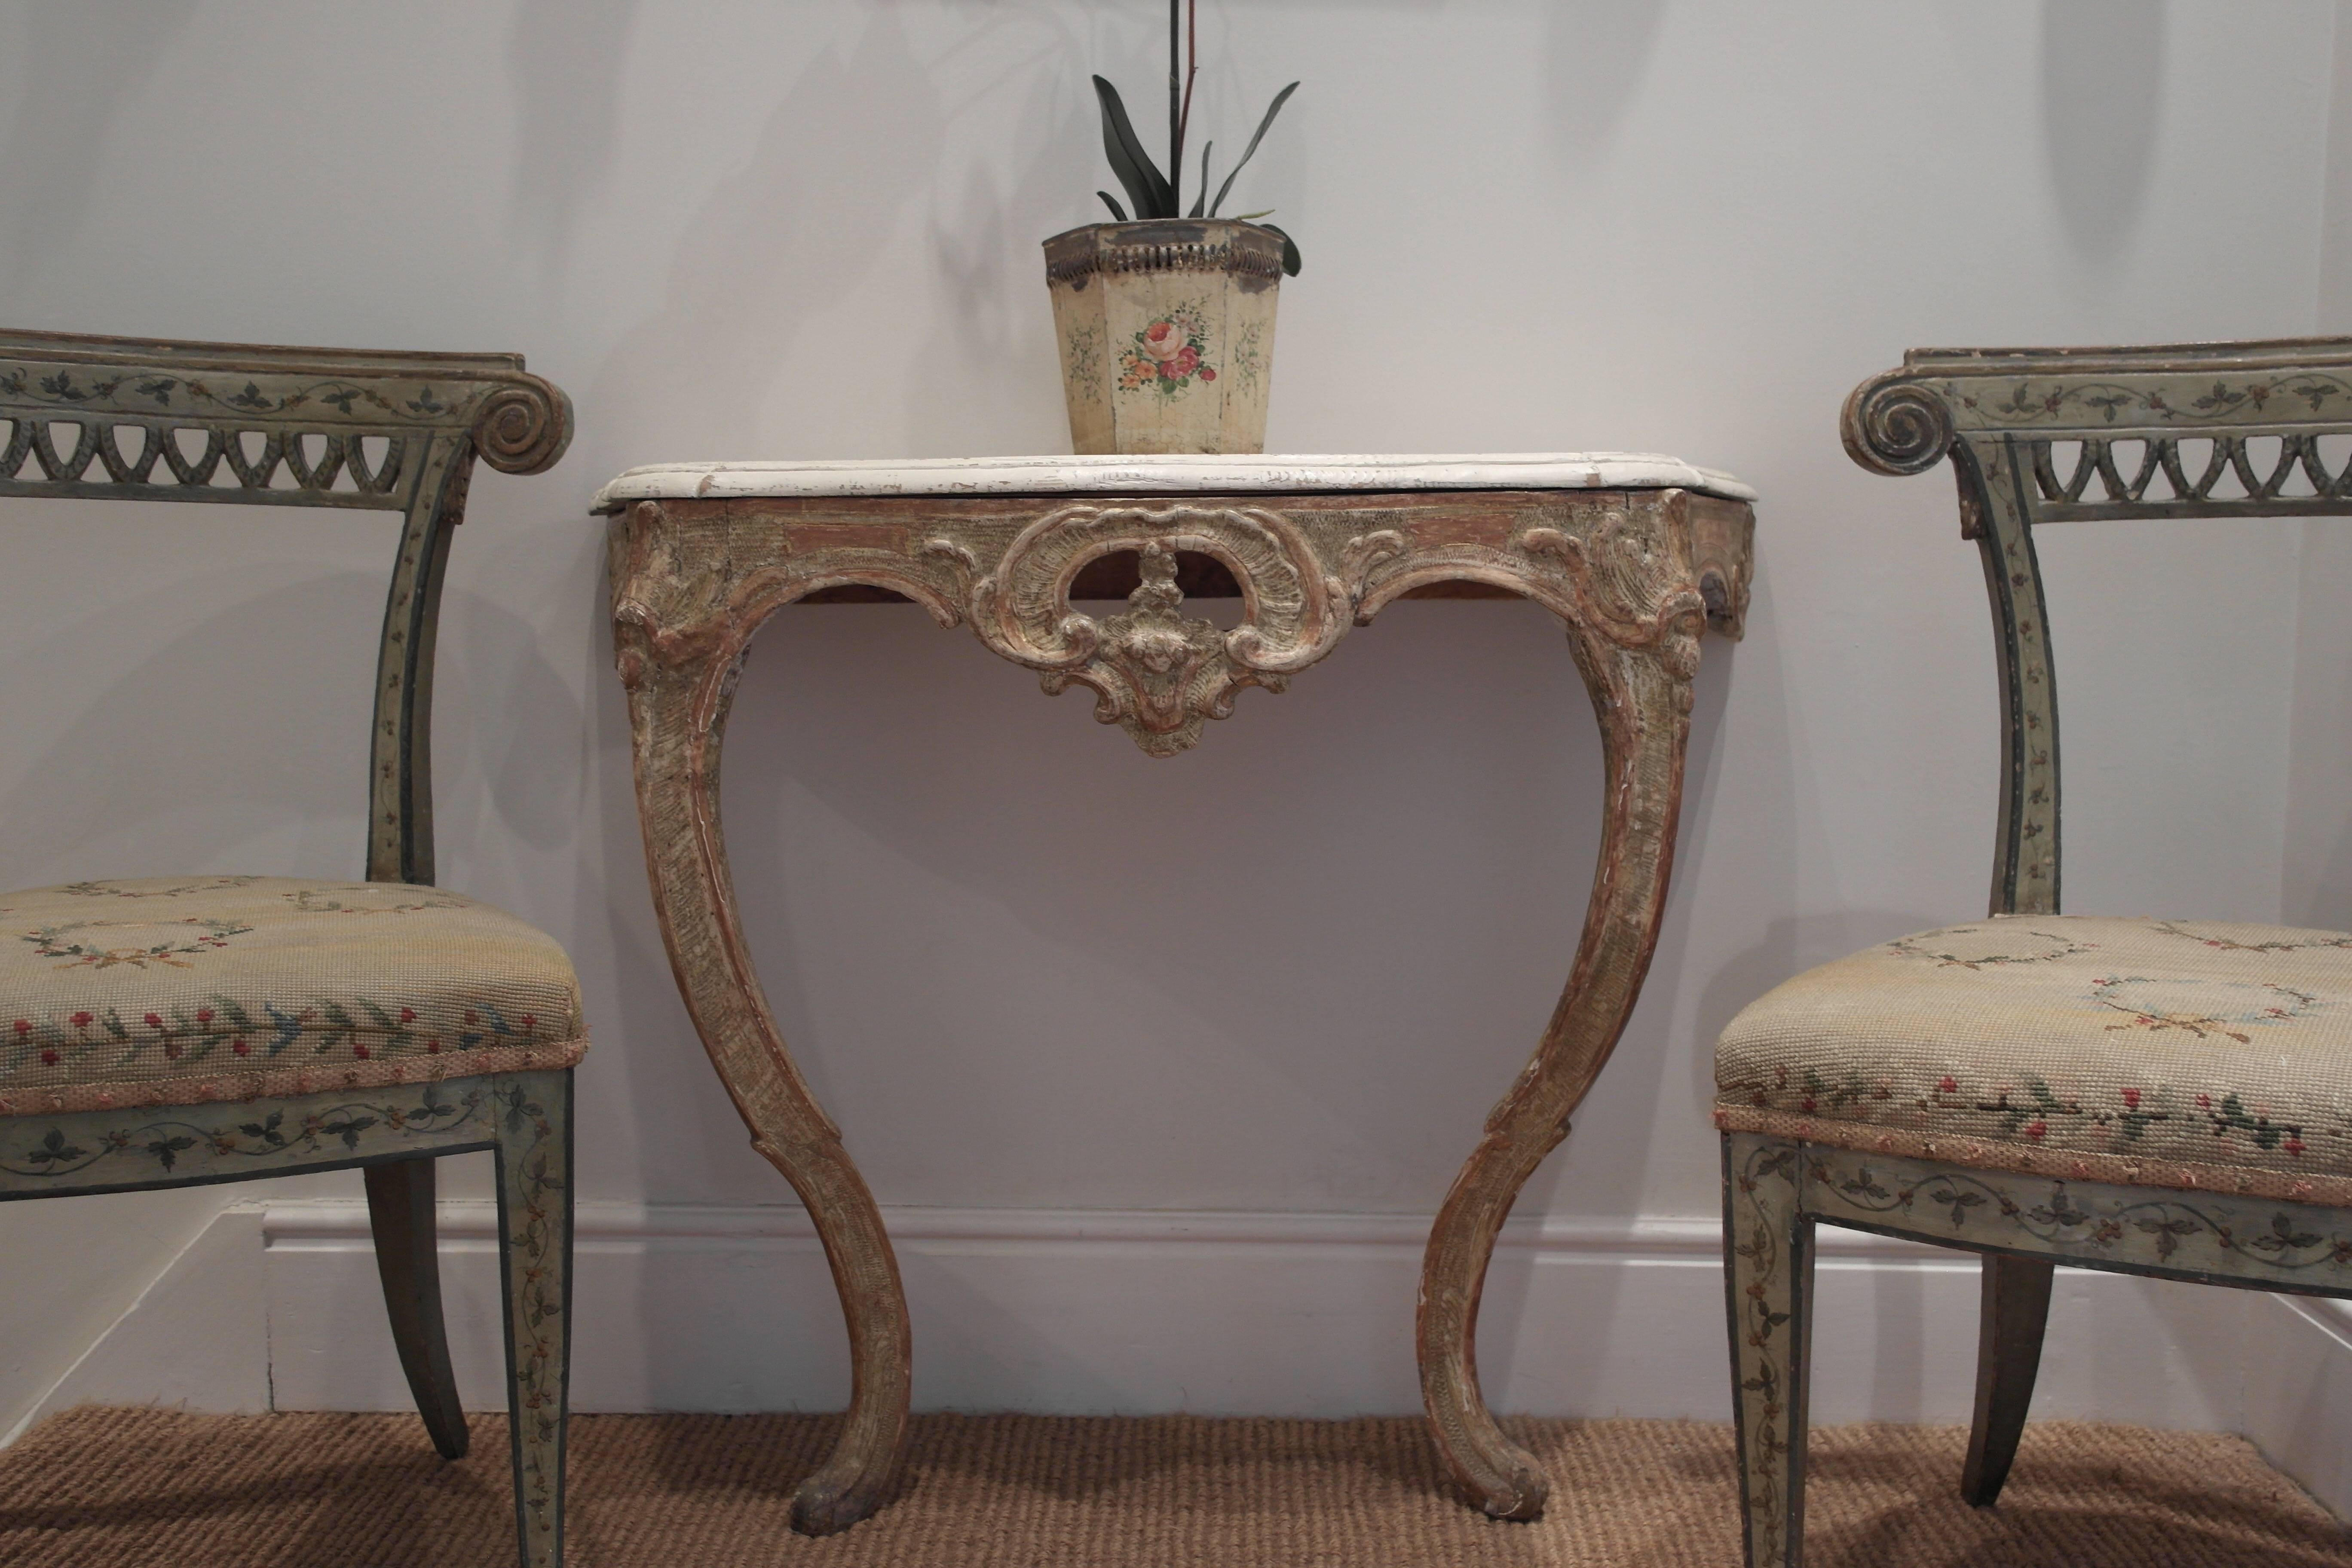 A small charming late 18th century Swedish console table with the fine hand-carved detail in original lightly gilded paint and in good condition. The original top has been repainted.